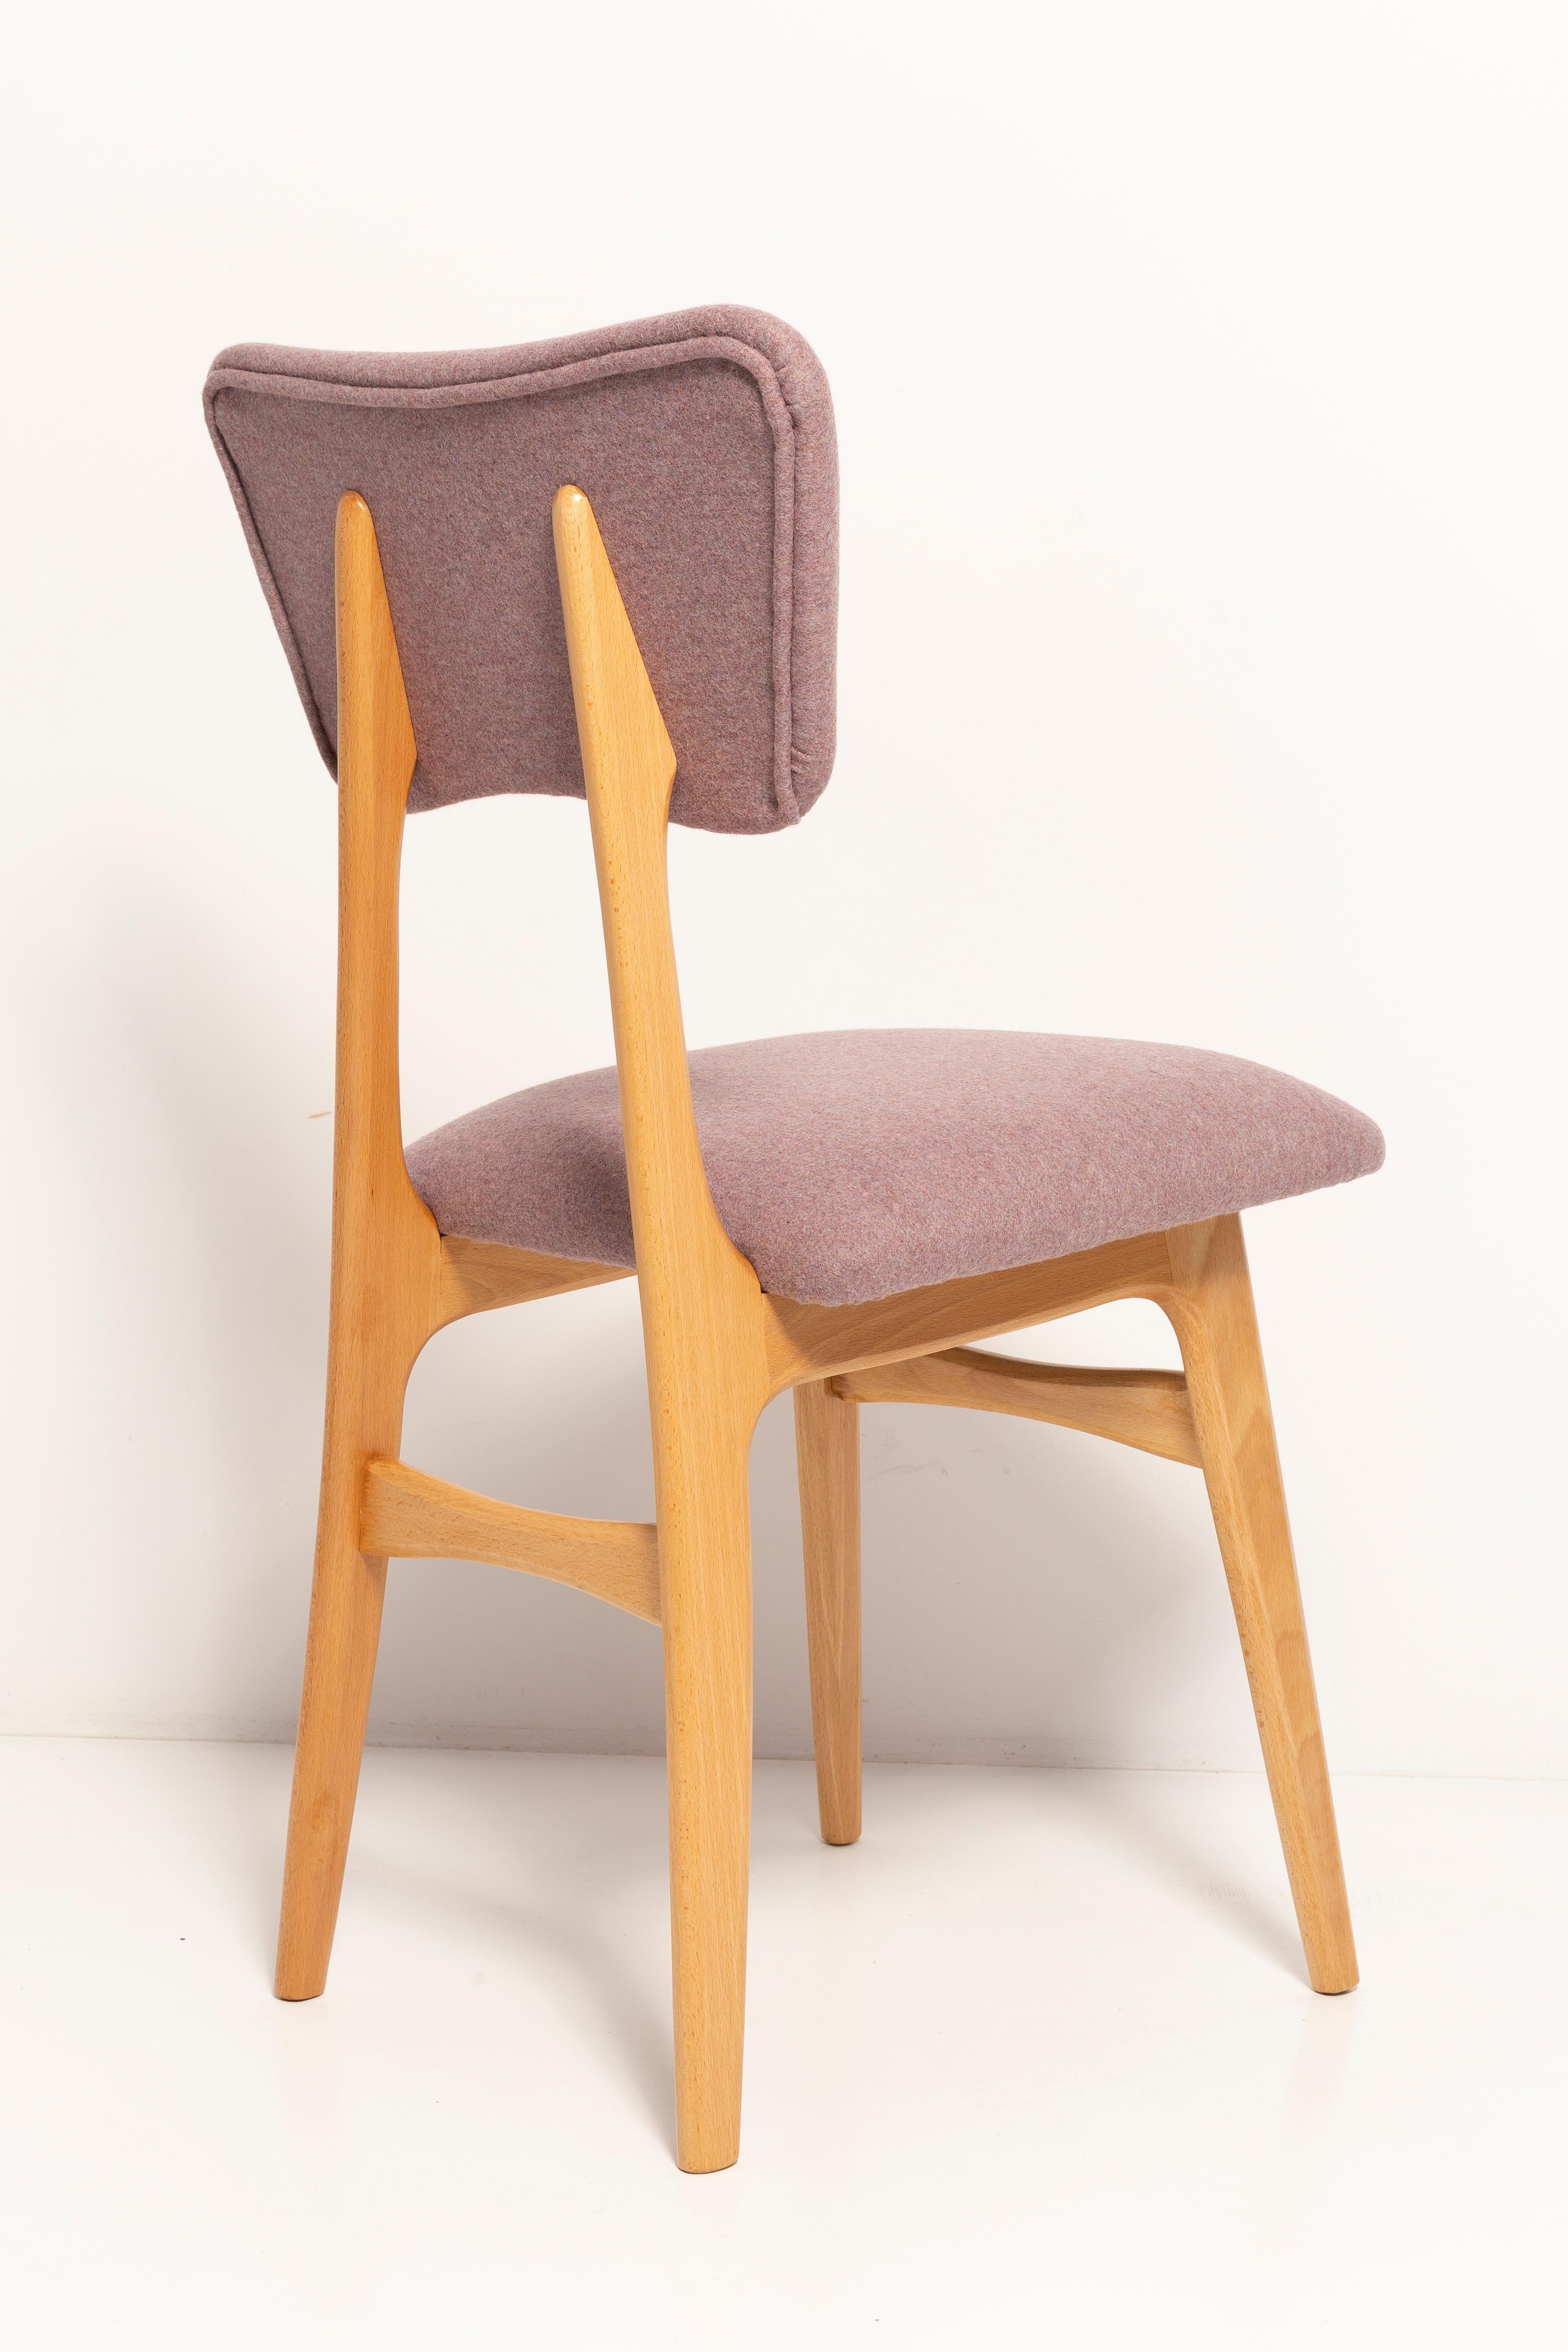 Hand-Crafted 20th Century Butterfly Dining Chair, Pink Wool, Light Wood, Europe, 1960s For Sale